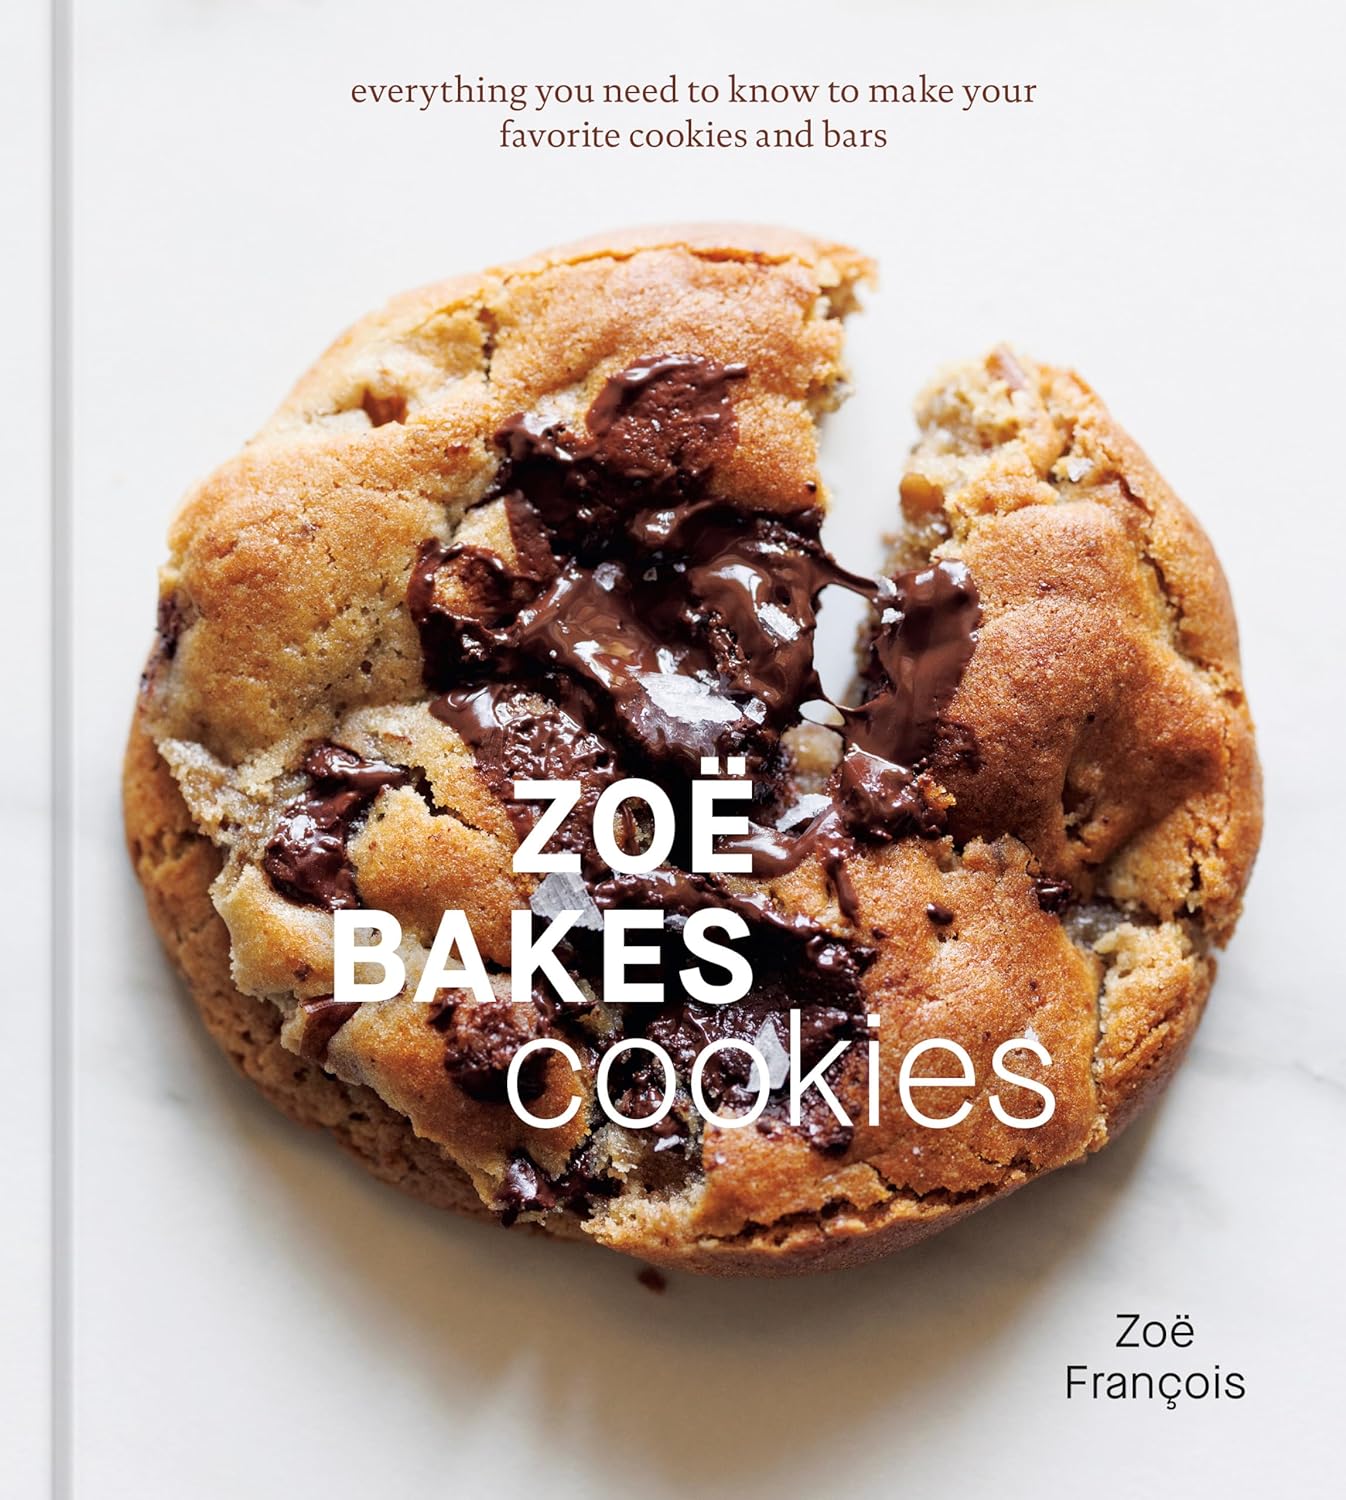 *Pre-order* Zoë Bakes Cookies: Everything You Need to Know to Make Your Favorite Cookies and Bars (Zoë François)